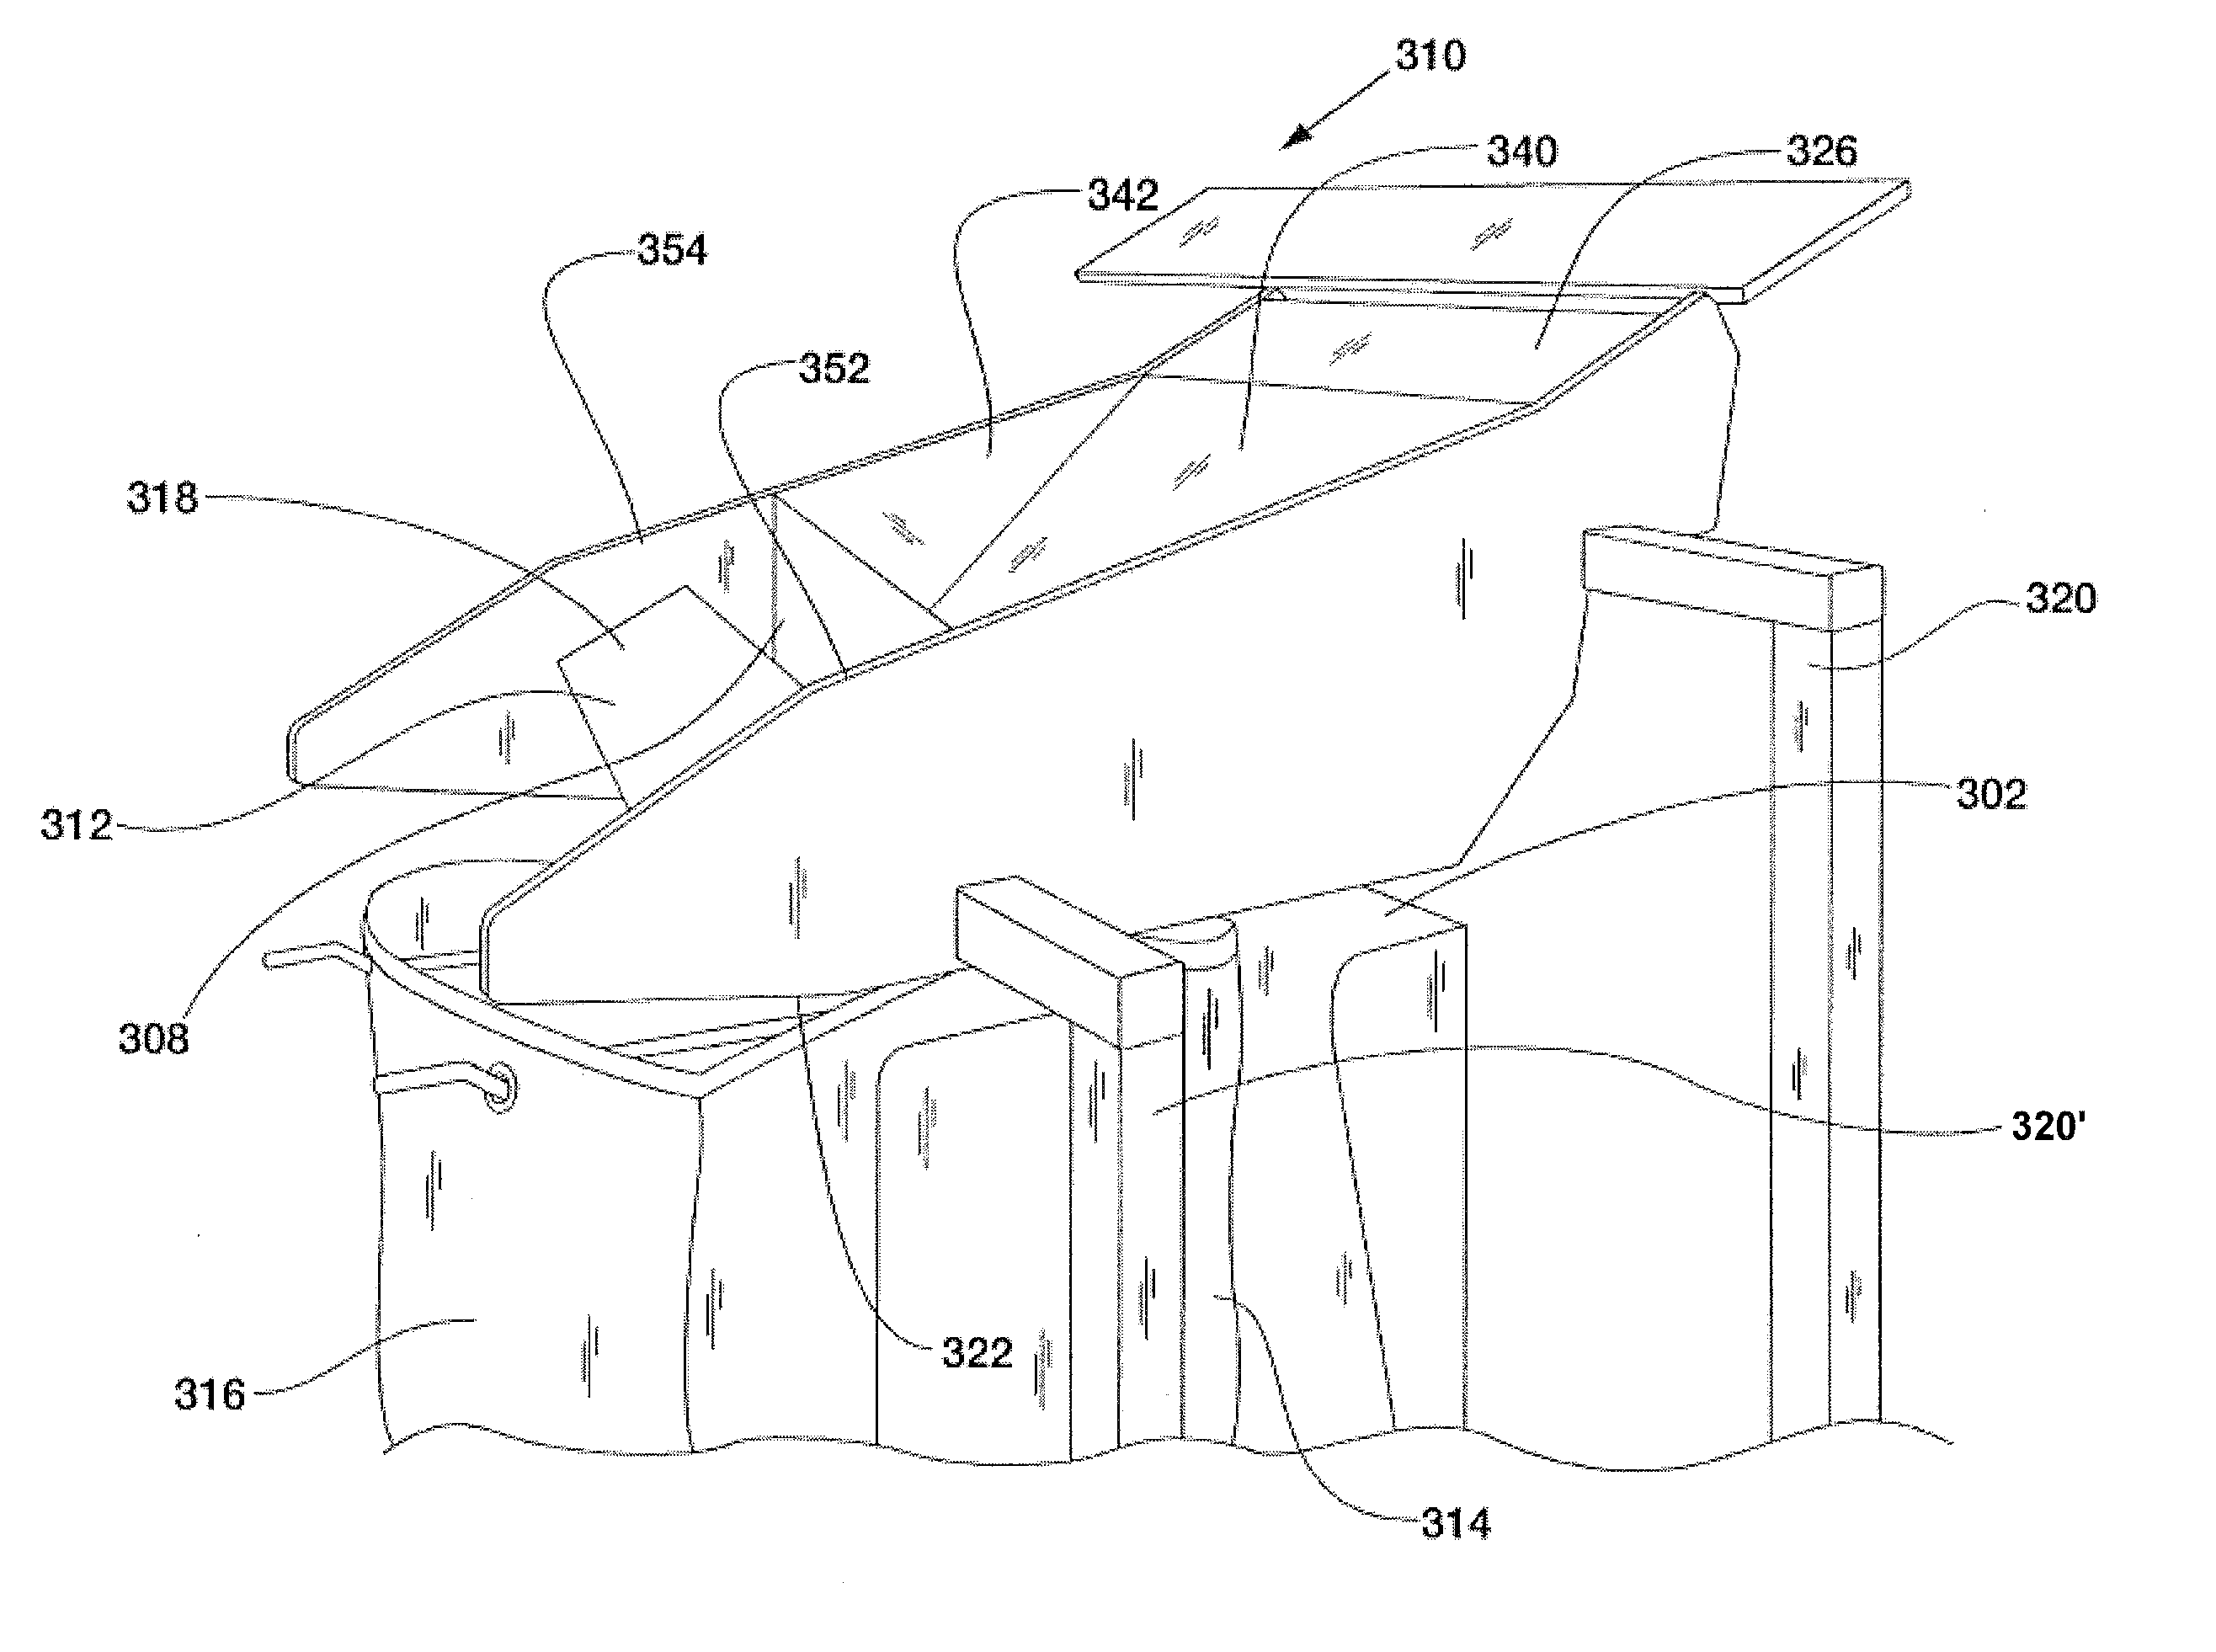 Dual-position chute for parcel handling